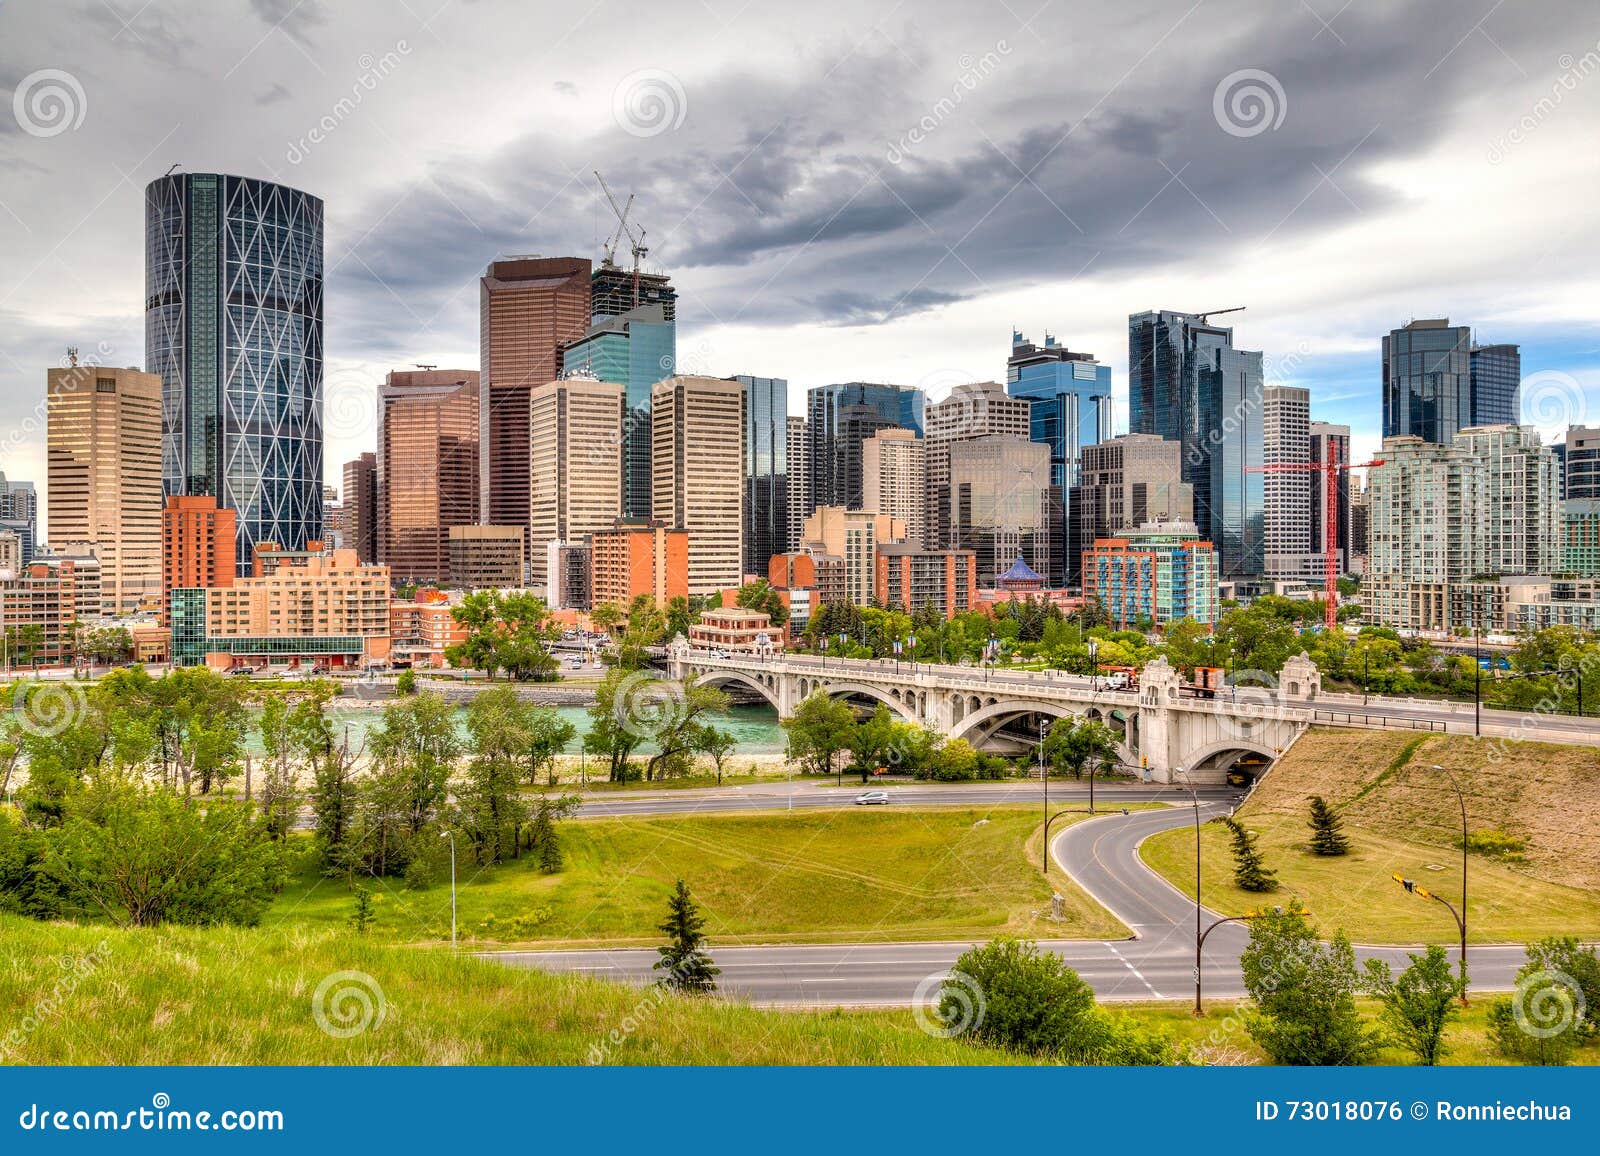 calgary downtown in hdr